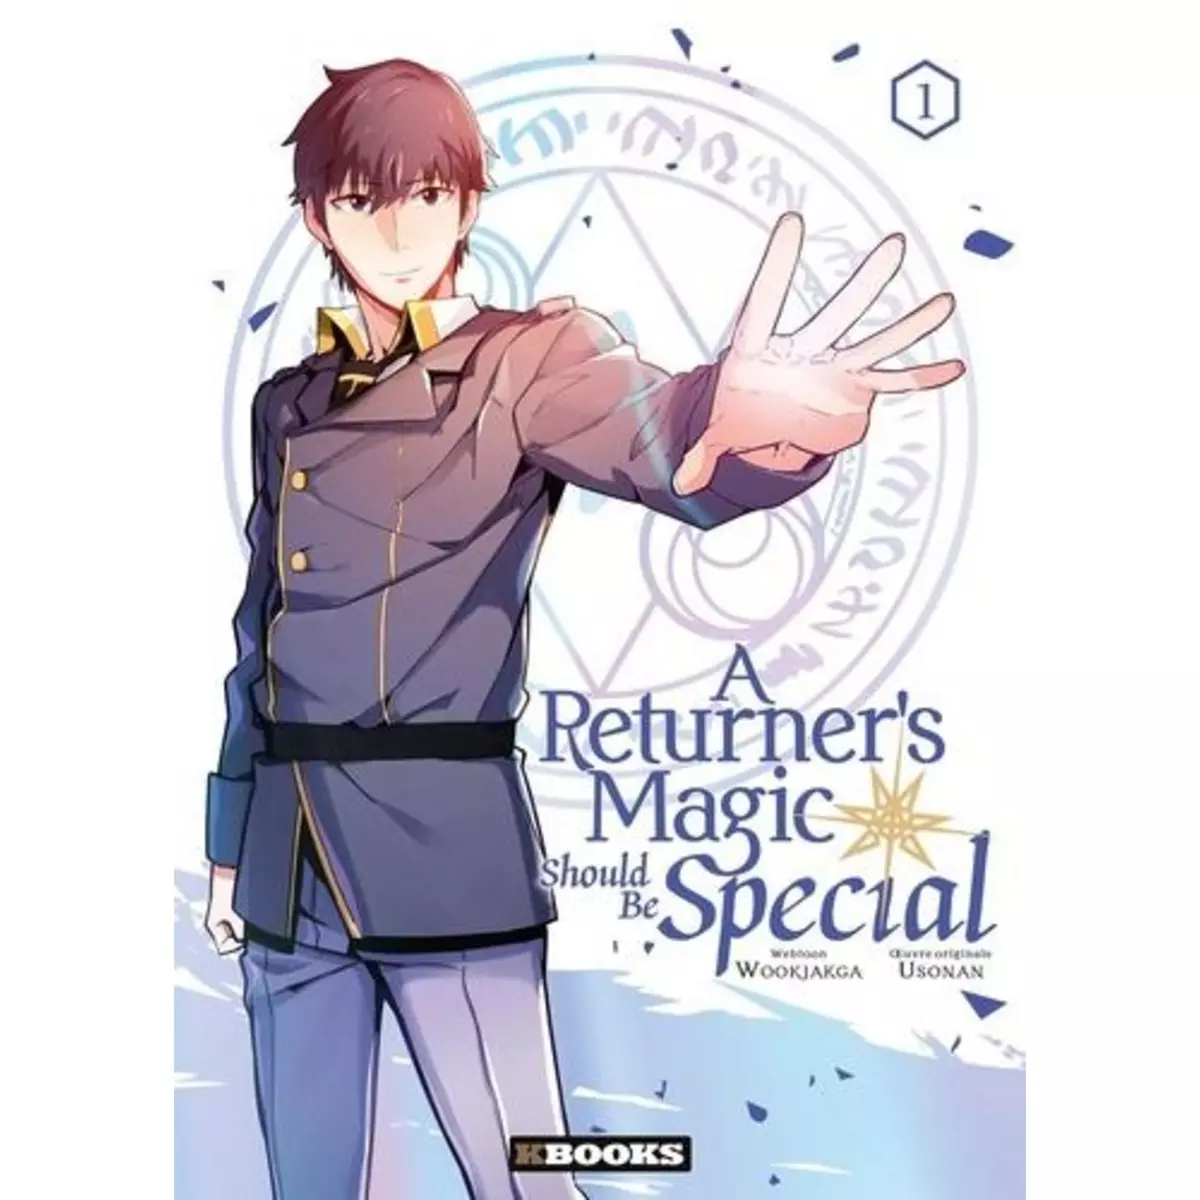  A RETURNER'S MAGIC SHOULD BE SPECIAL TOME 1 , Wookjakga